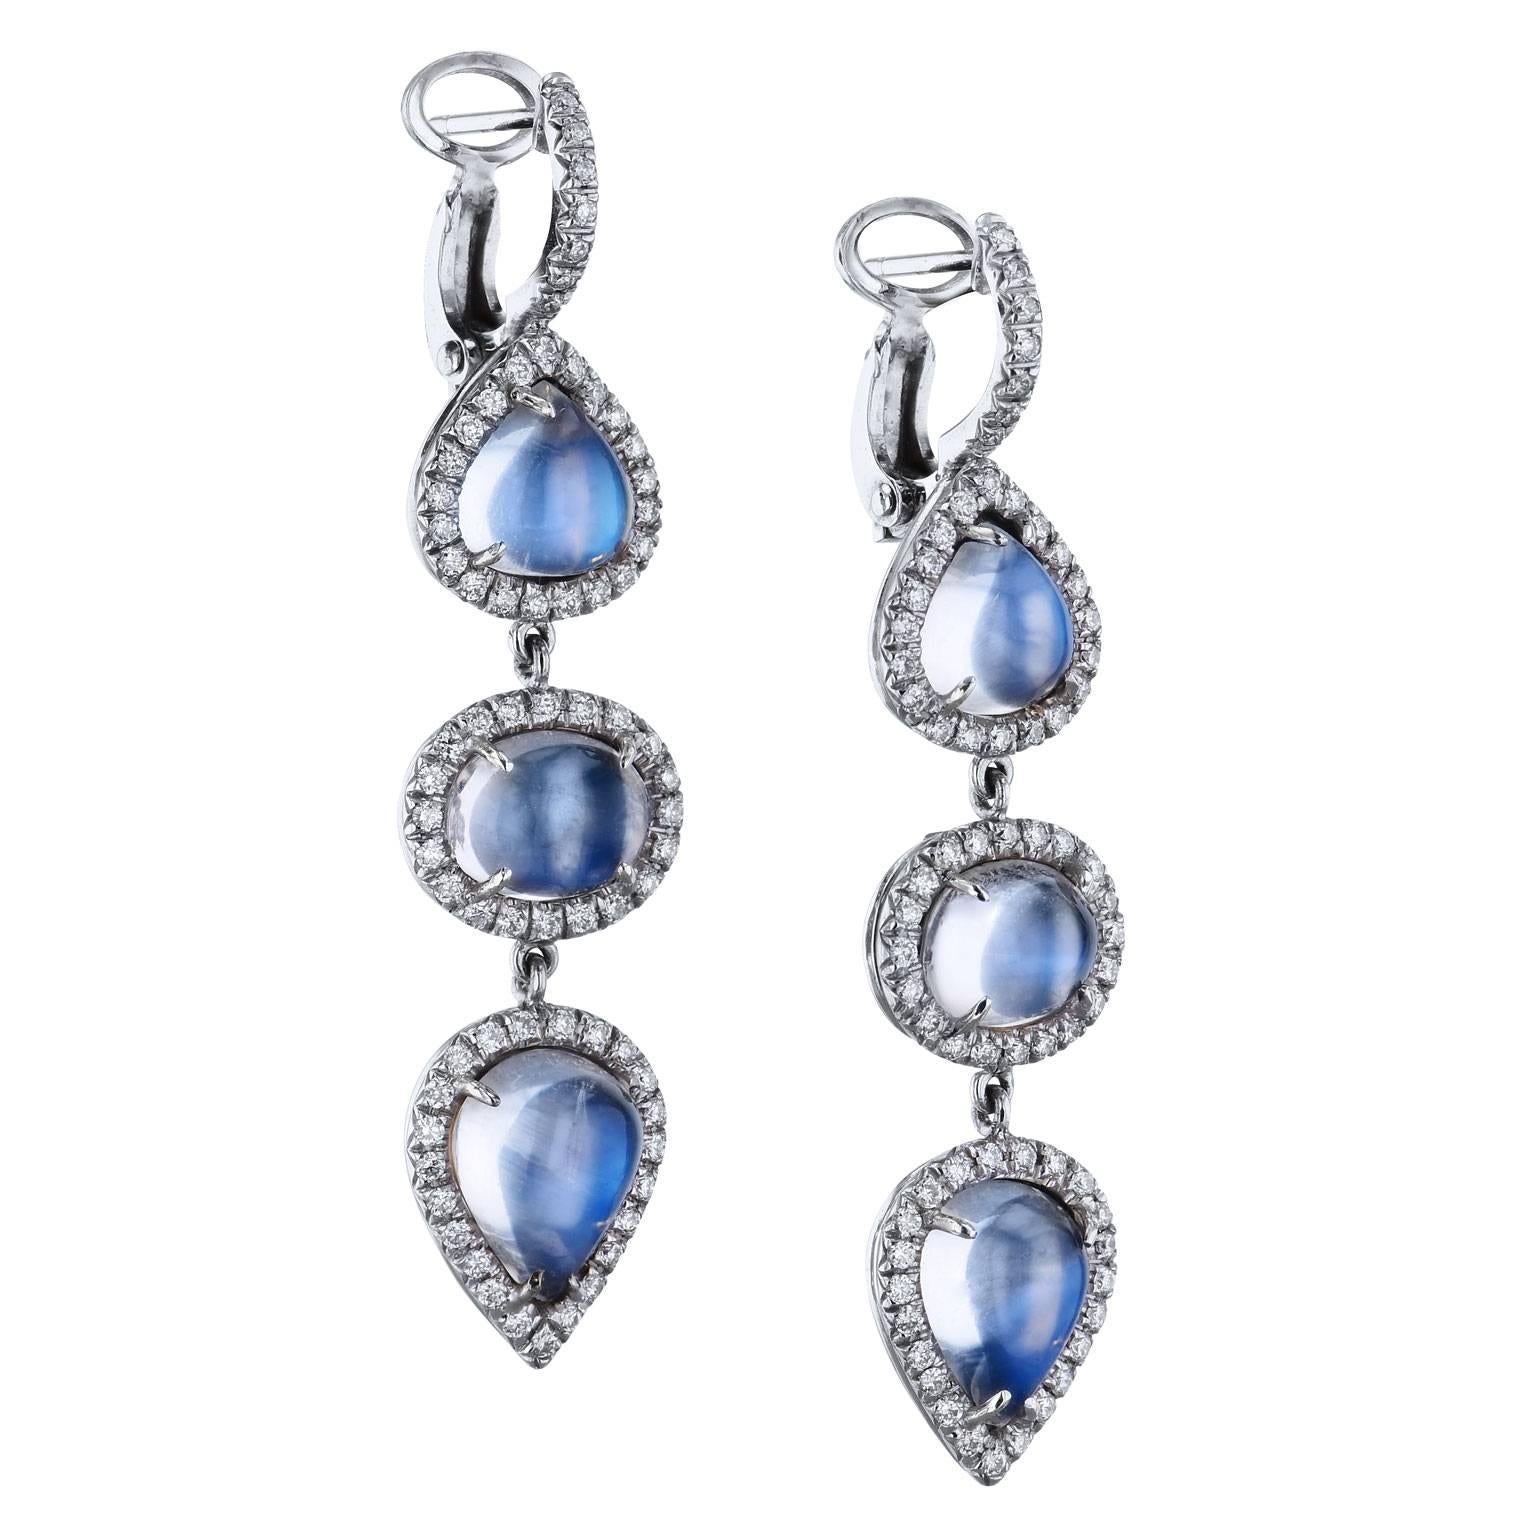 Ethereally fashioned in 18 karat white gold, six pear and oval-shaped moonstones, with a total weight of 12.50 carat, are embraced by 1.17 carat of pave-set diamonds (G/H/VS) in these handmade dangle earrings by H.